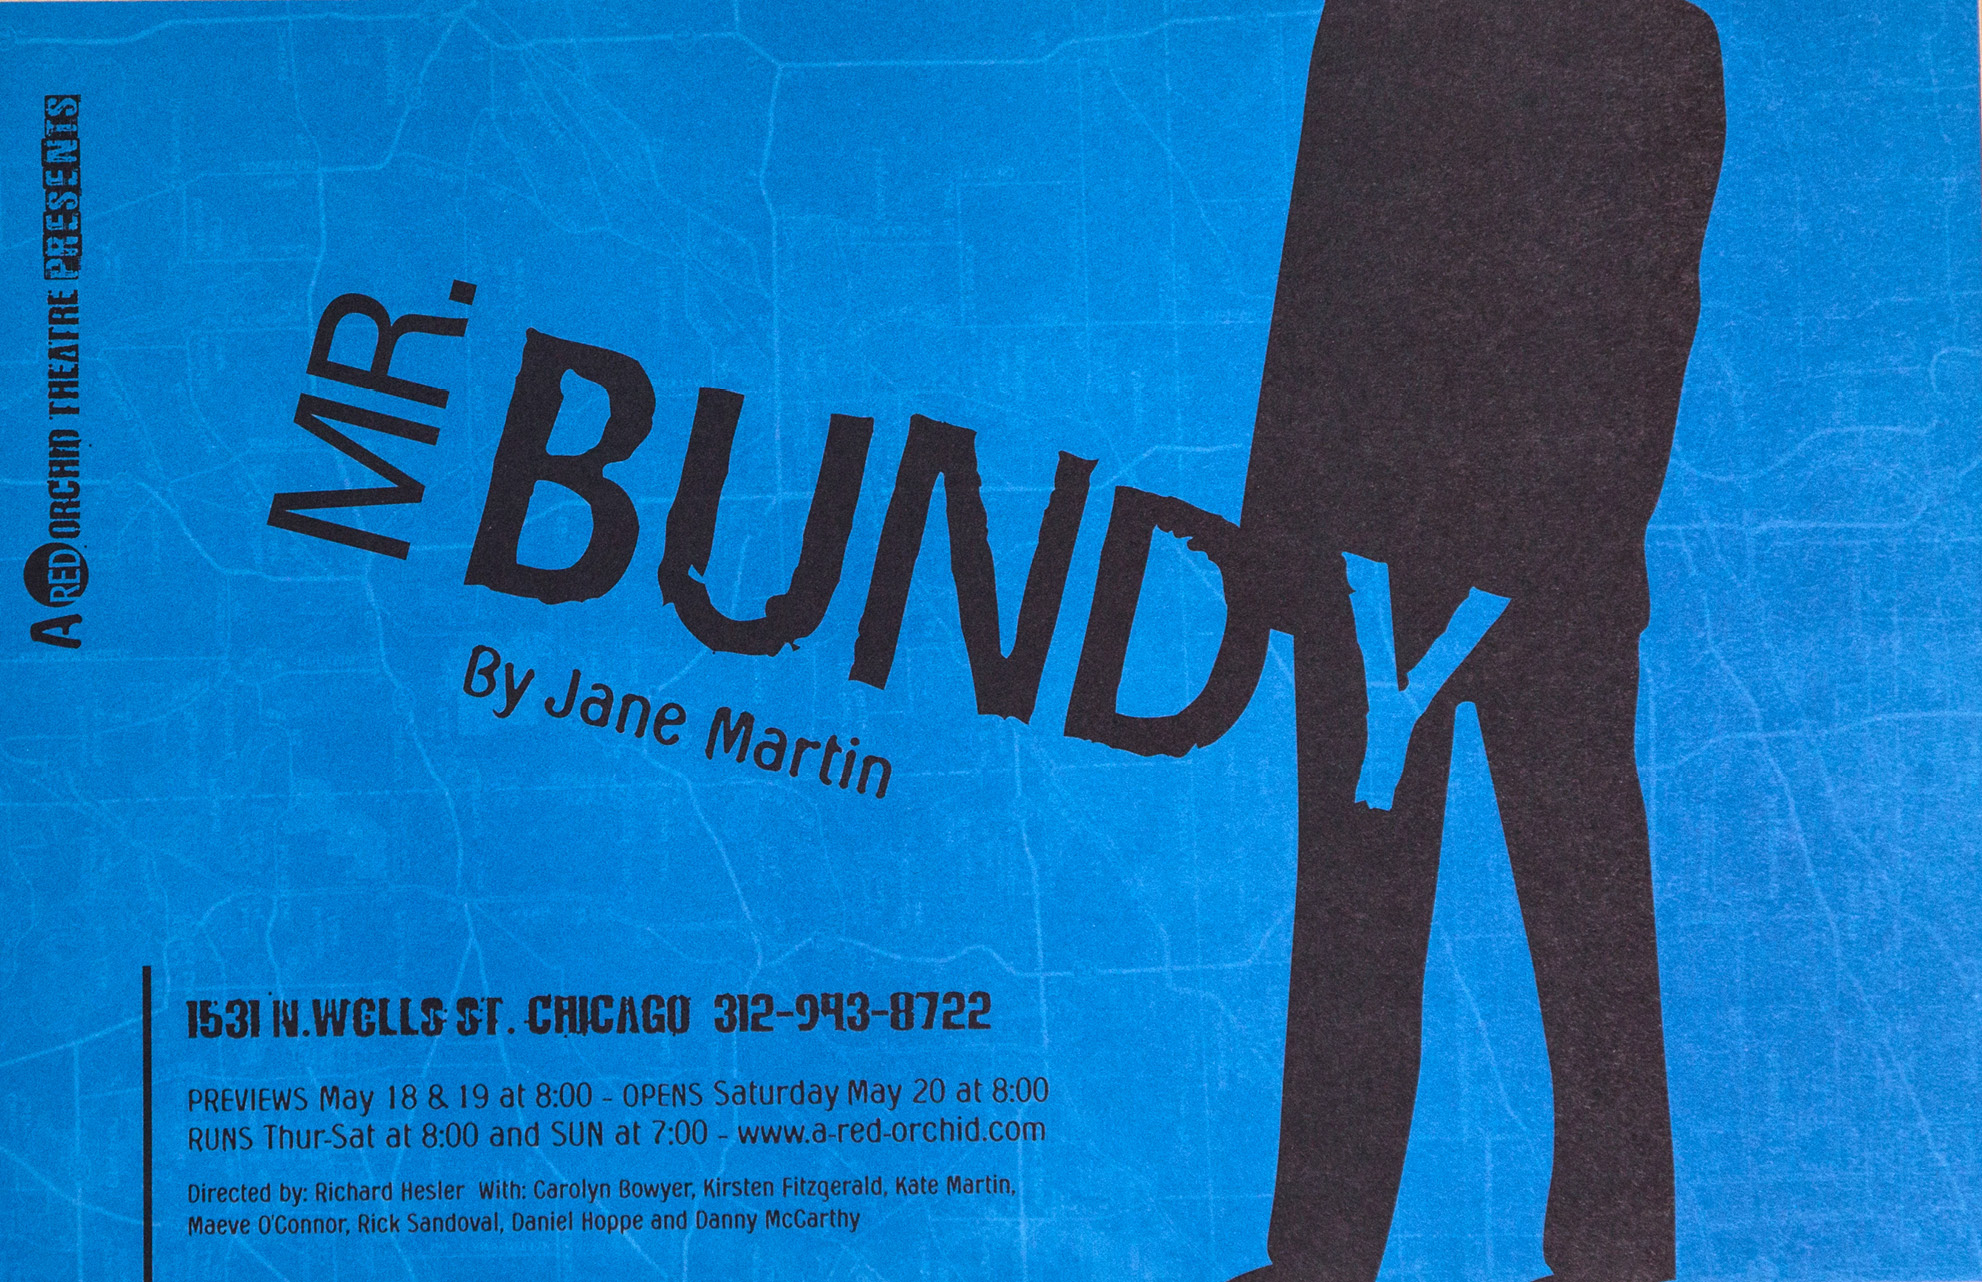 Chicago Premiere
Mr. Bundy chronicles what happens in a peaceful, suburban community when it suddenly finds a convicted sex offender living next door. This compelling drama about the dilemma of sex-offender registration and the right to privacy questions humanity and its levels of tolerance. There are no easy answers, especially when some in society view these offenders as nuclear waste. In Mr. Bundy, the “not in my back-yard” adage takes on a palpable significance, creating a paradigm that addresses how our need for protection can ultimately destroy us. Mr. Bundy forces us to face the question: are these the lessons we want to teach our children?